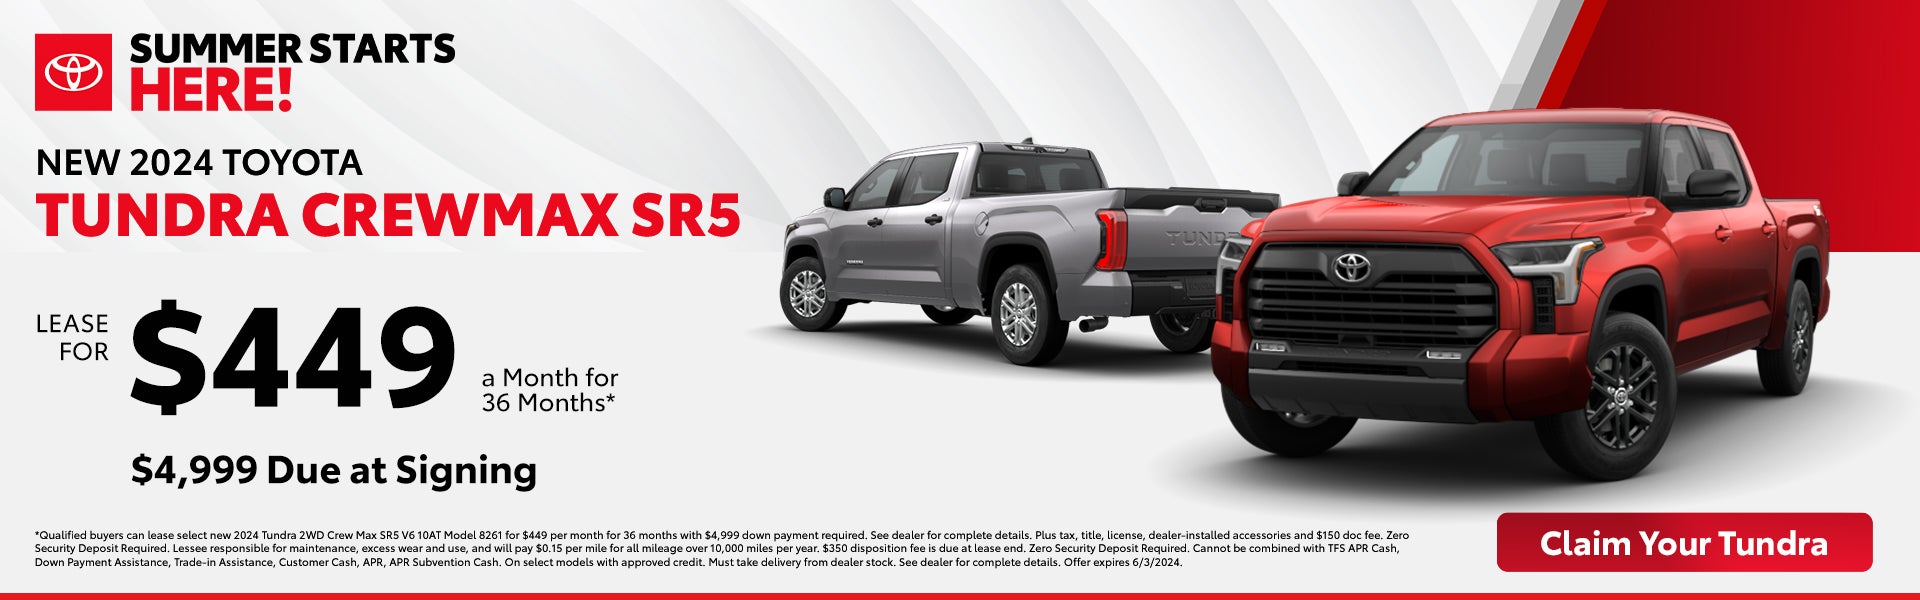 New 2024 Toyota Tundra Lease Offer Fort Worth TX